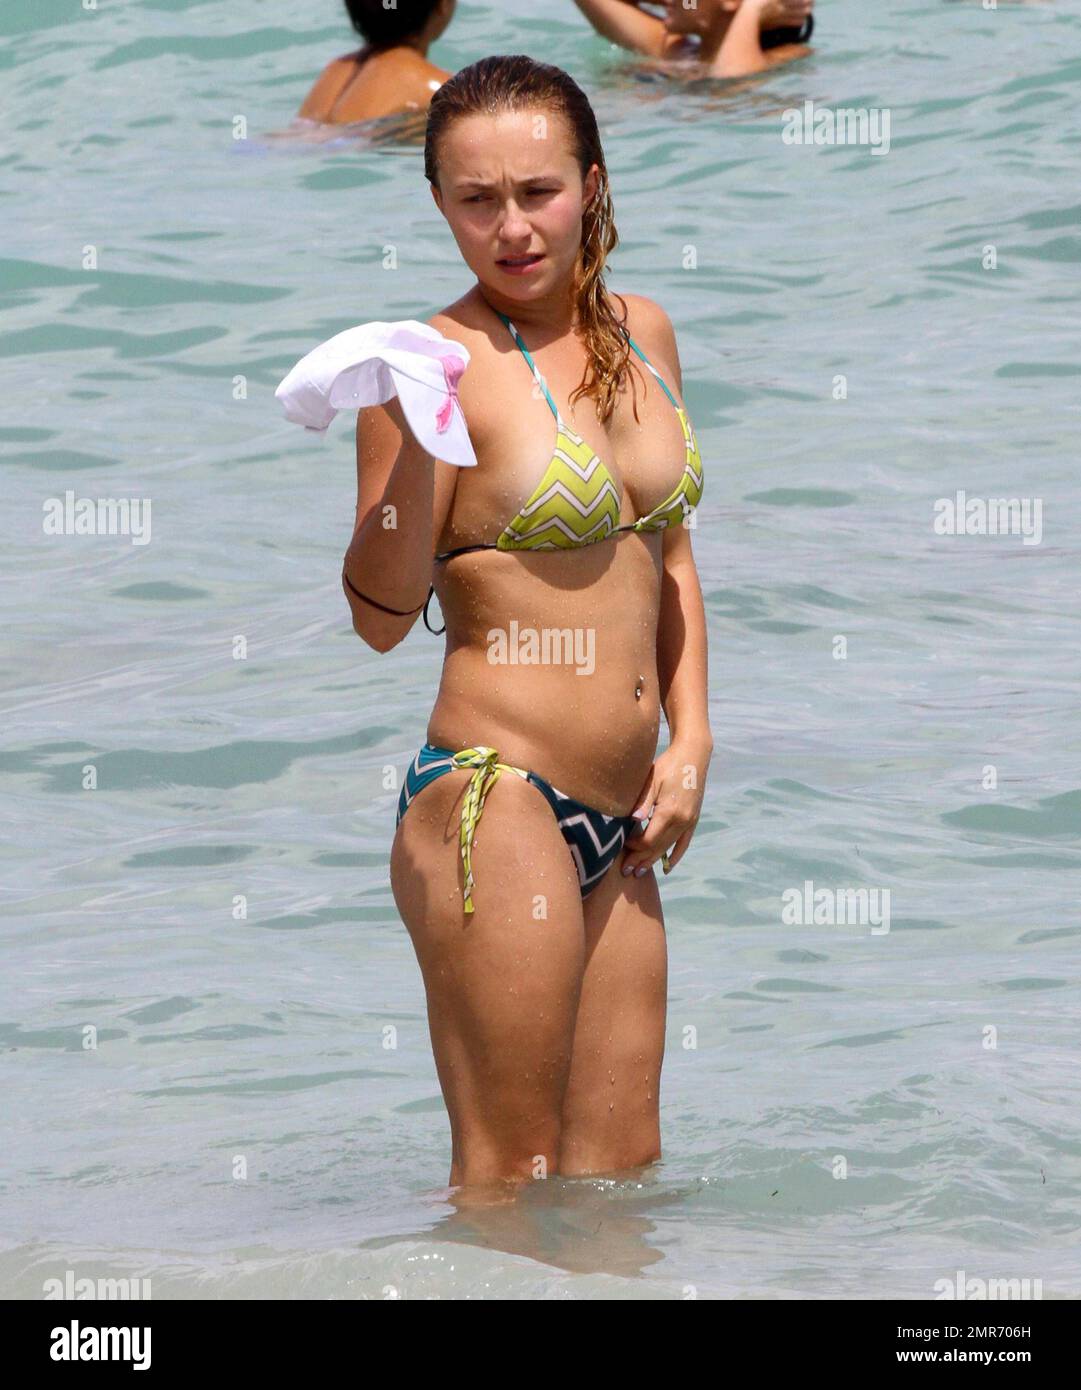 Hayden Panettiere spends Labour Day weekend with friends wearing a colorful  bikini and taking a dip in the ocean near her fiancé's beach home.  Hollywood Beach, FL. 1st September 2013 . Tel